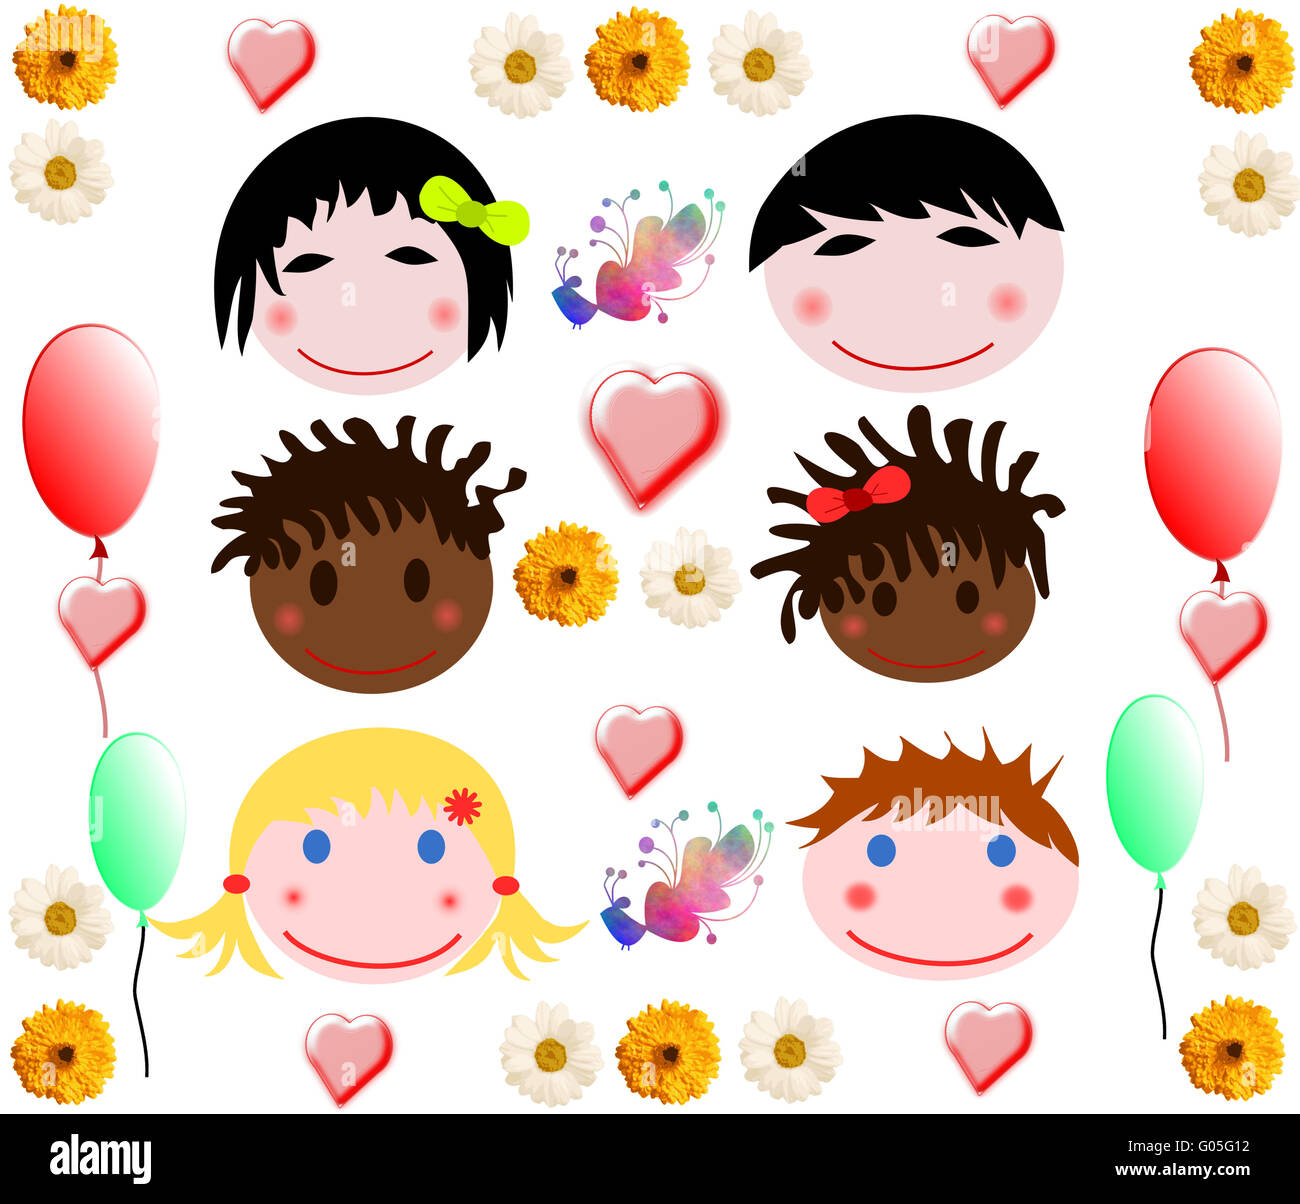 Collection of merry baby faces of different races Stock Photo